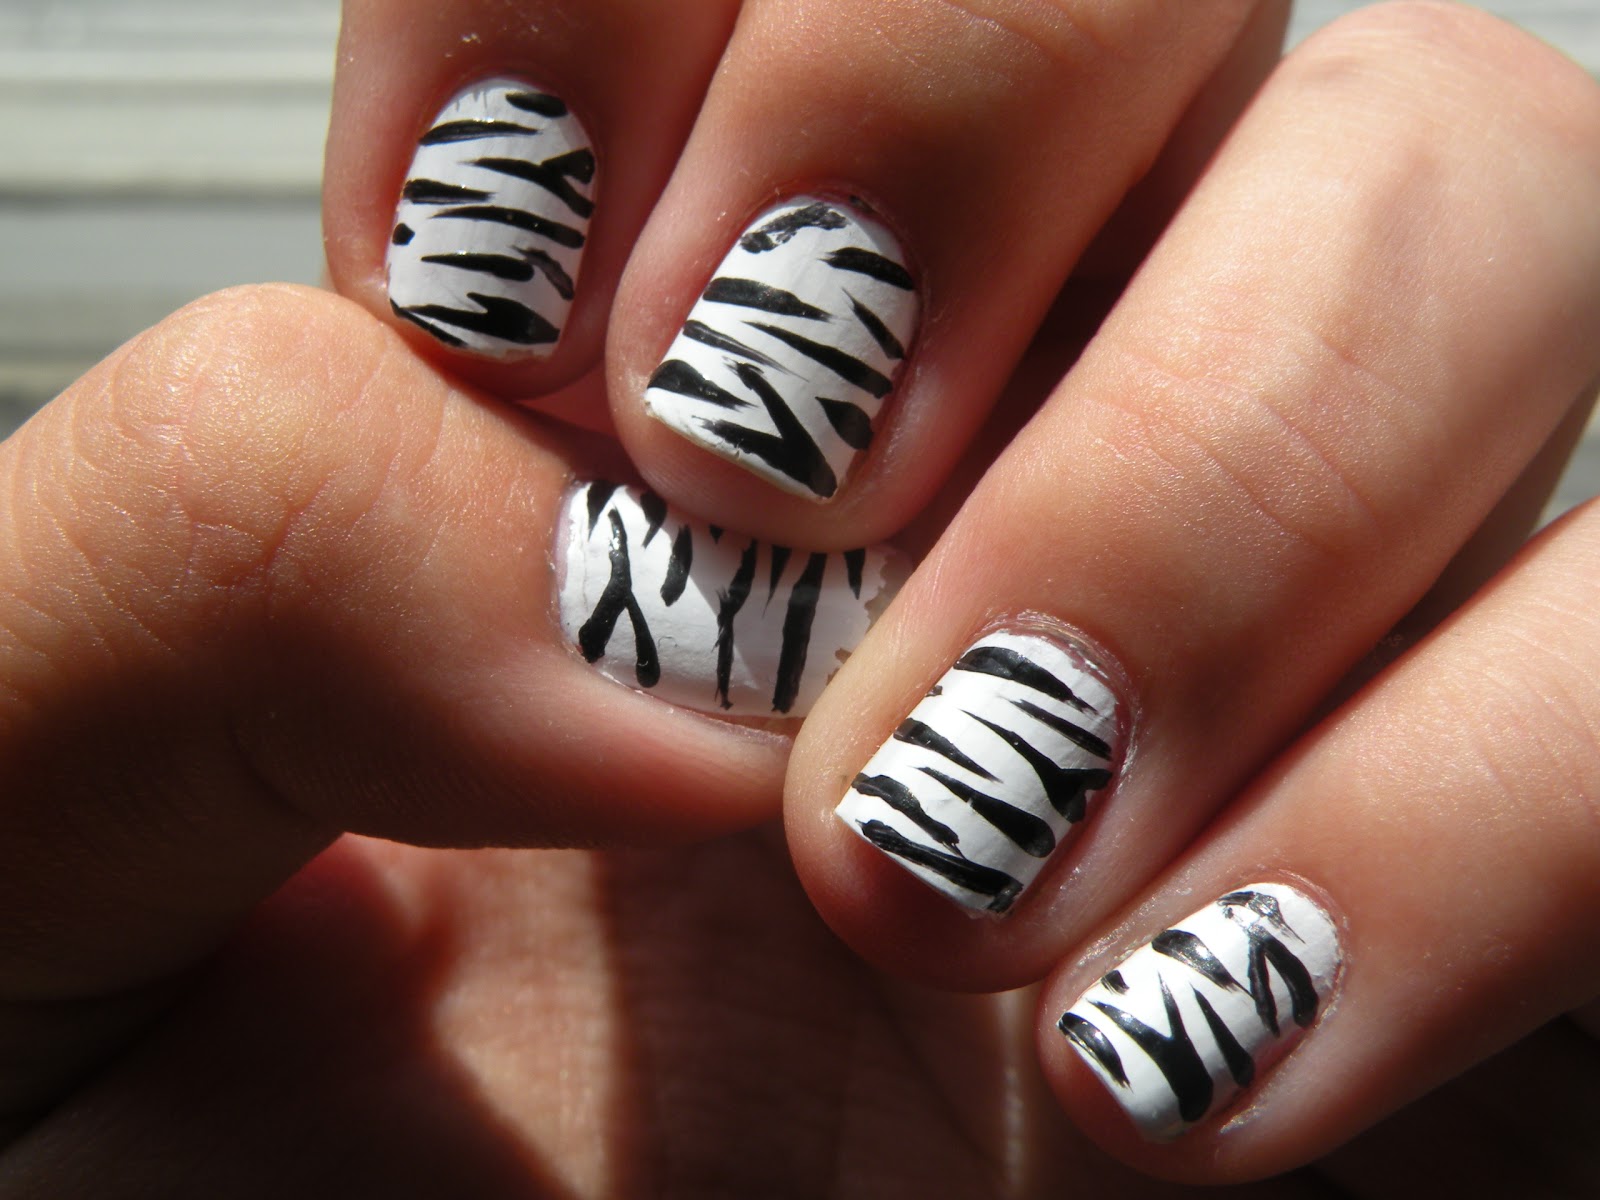 ... full one, but I absolutely love zebra print so I couldn't resist